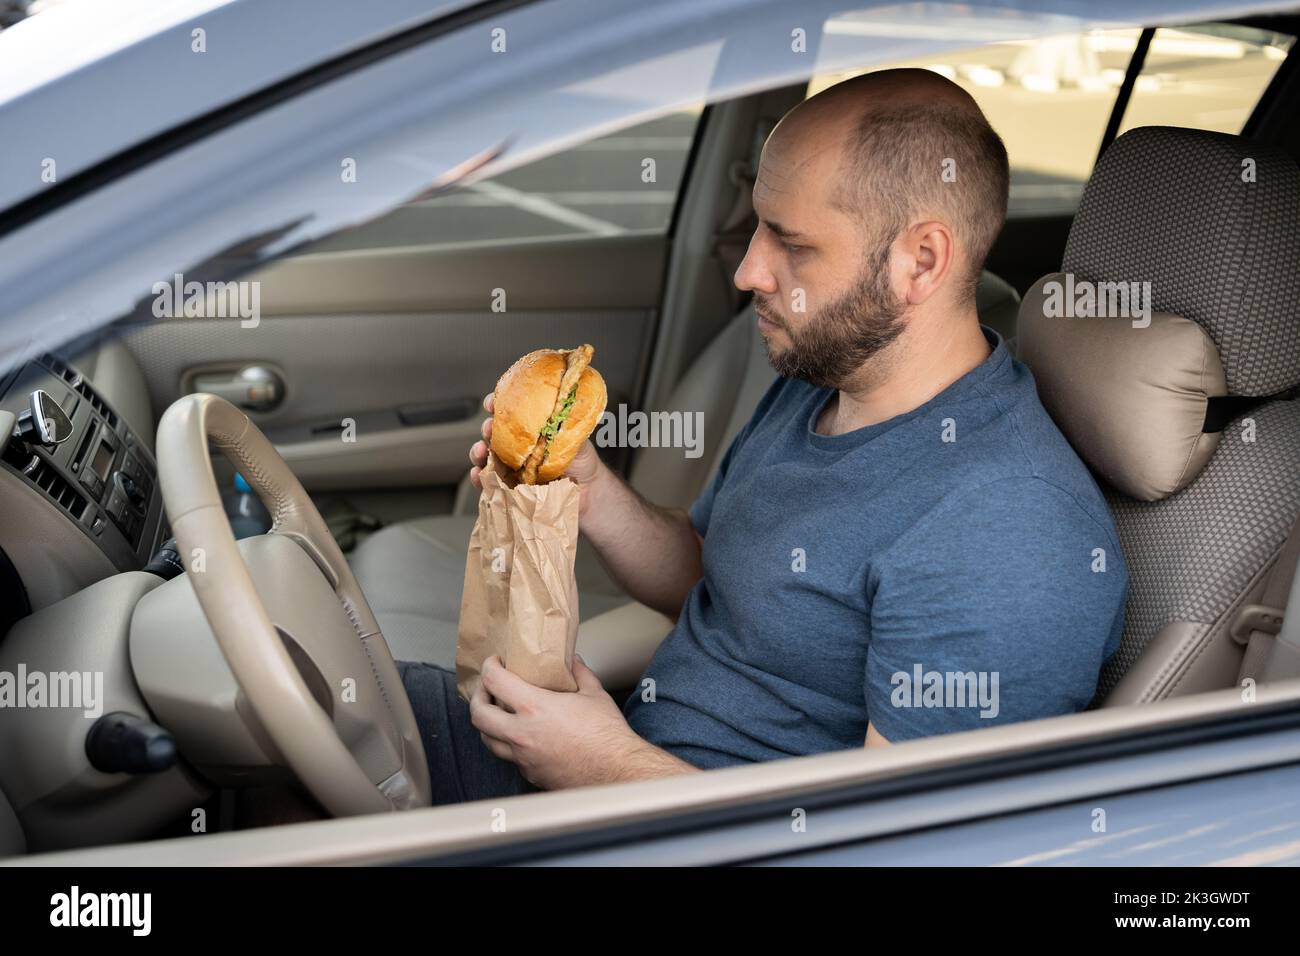 Man driving car while eating hamburger. Waiting and standing in traffic jam on road Stock Photo